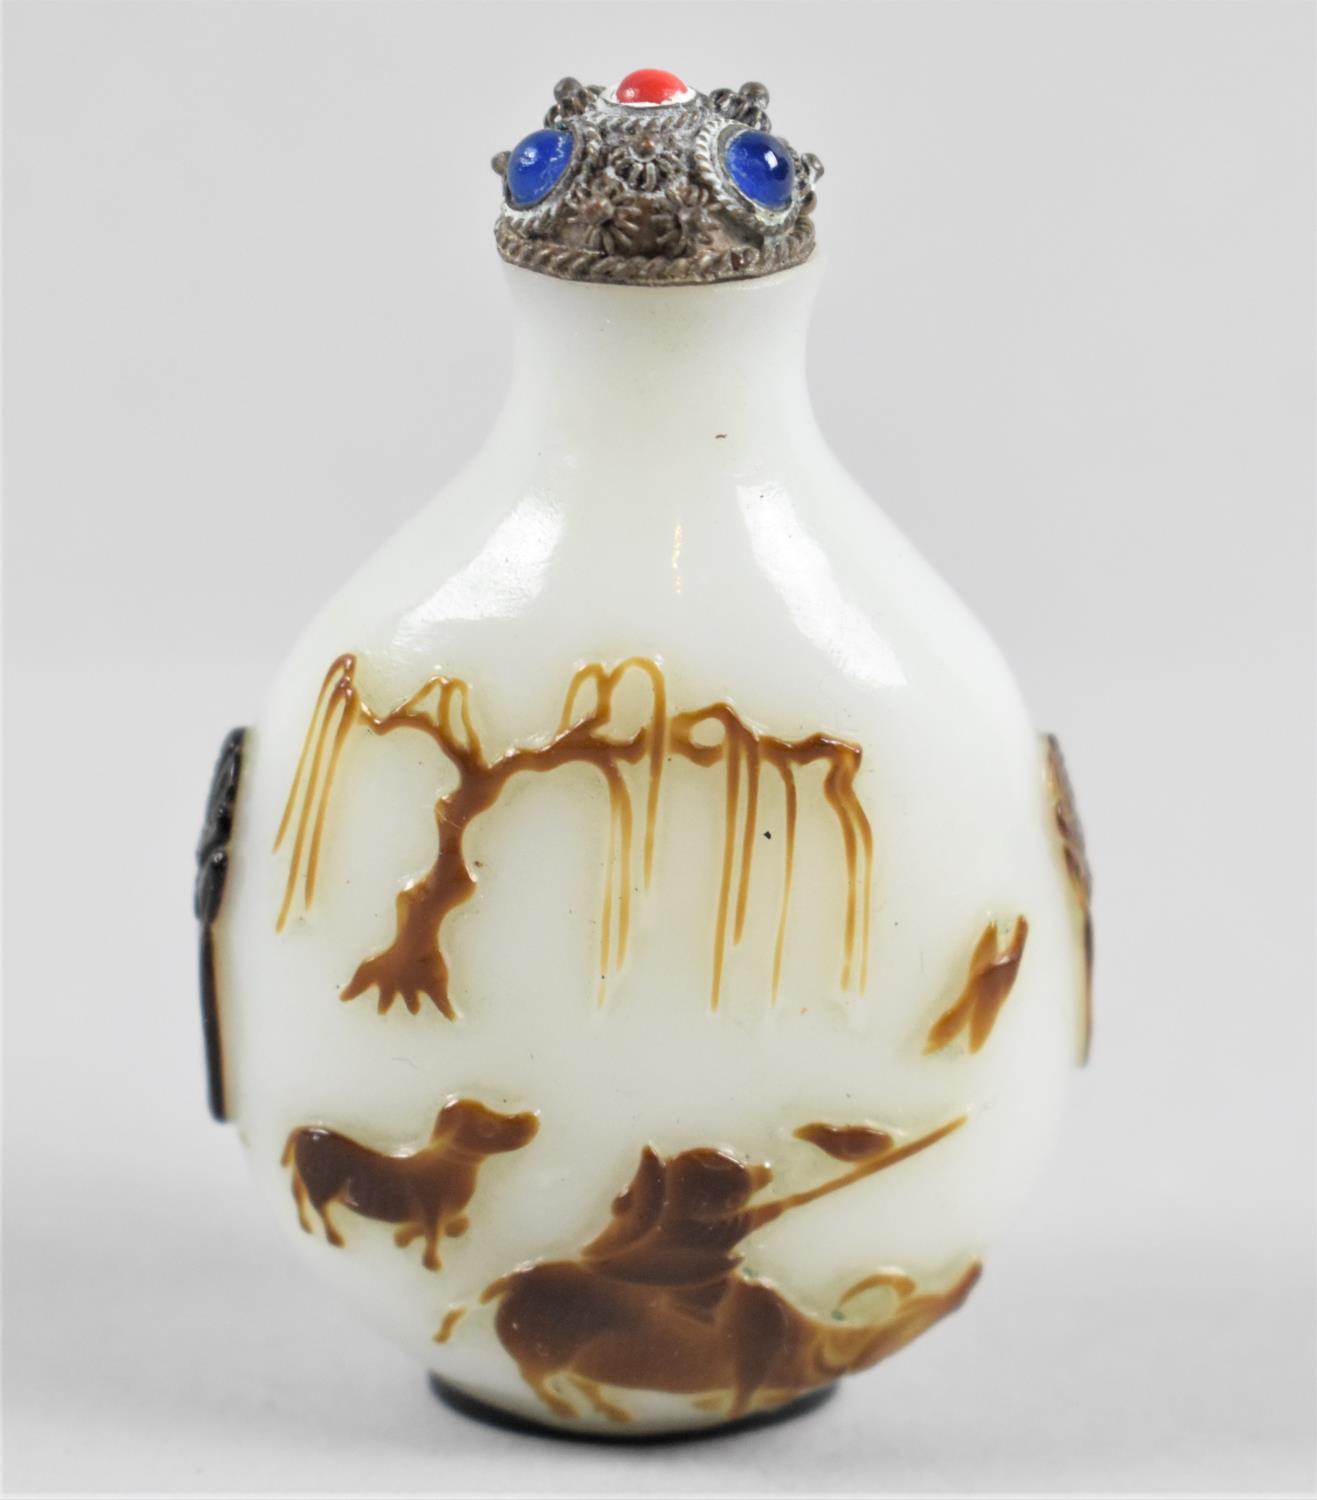 A Chinese Carved Peking Glass Snuff Bottle with Relief Carving Depicting Boy and Buffalo, White